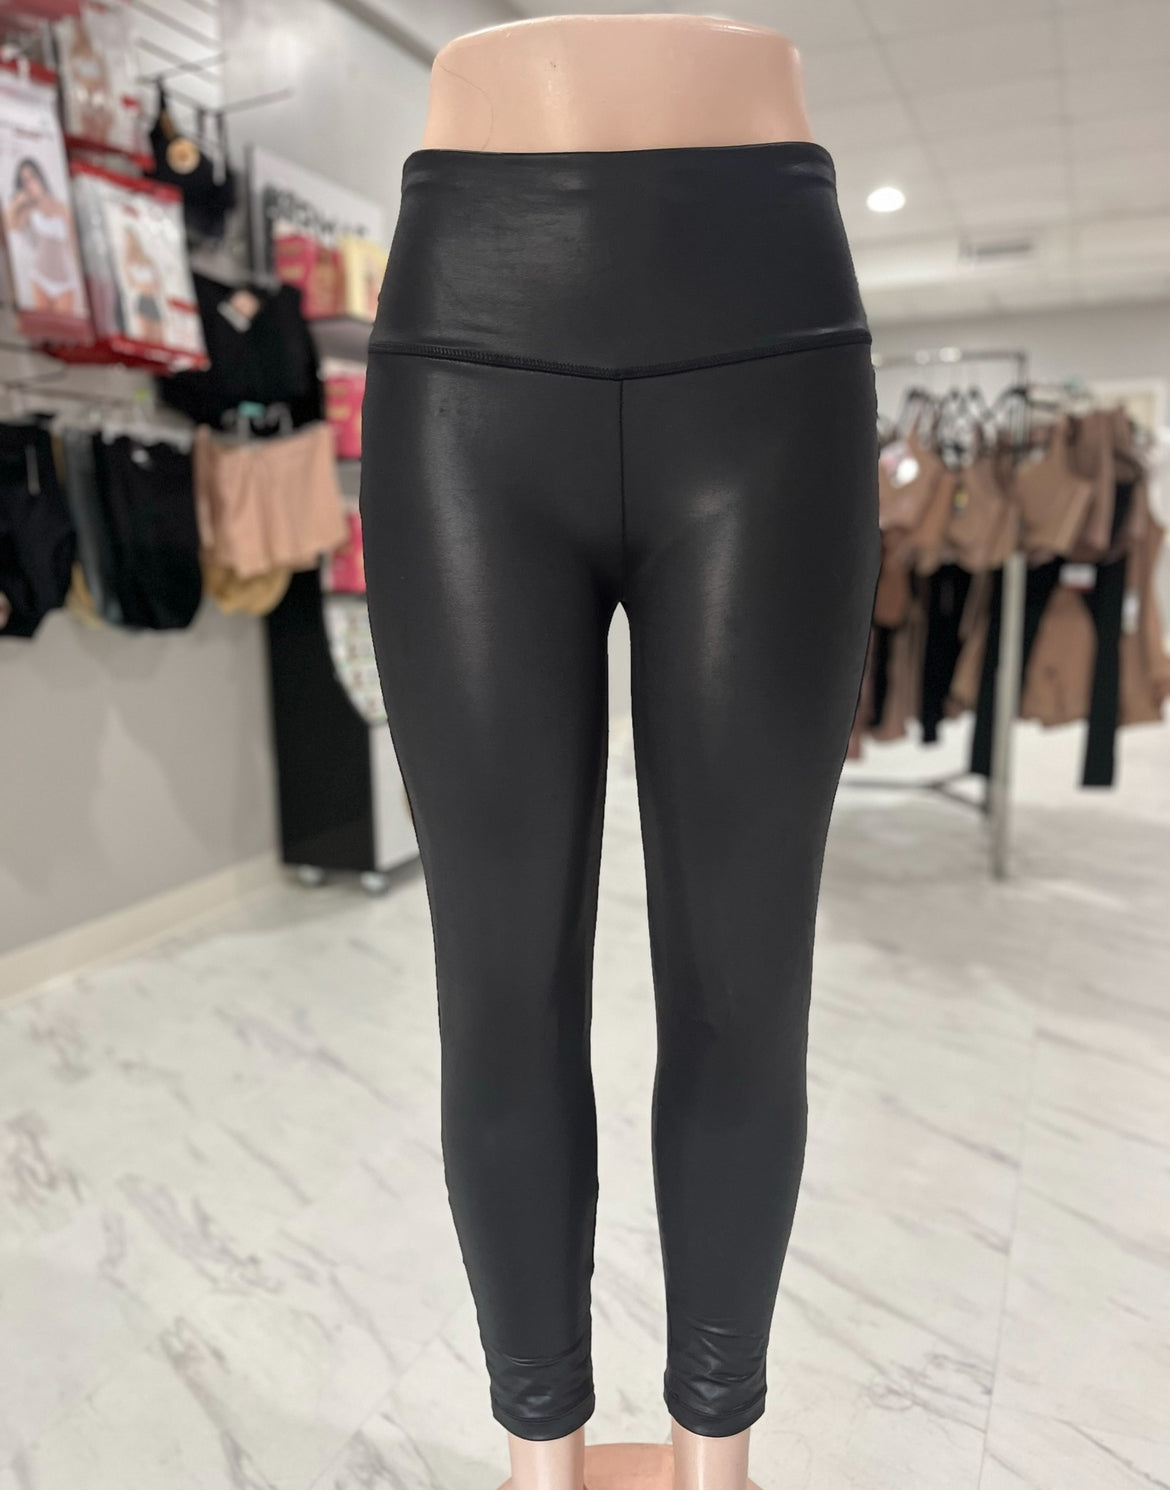 Pes High quality legging booty lift lower belly compression